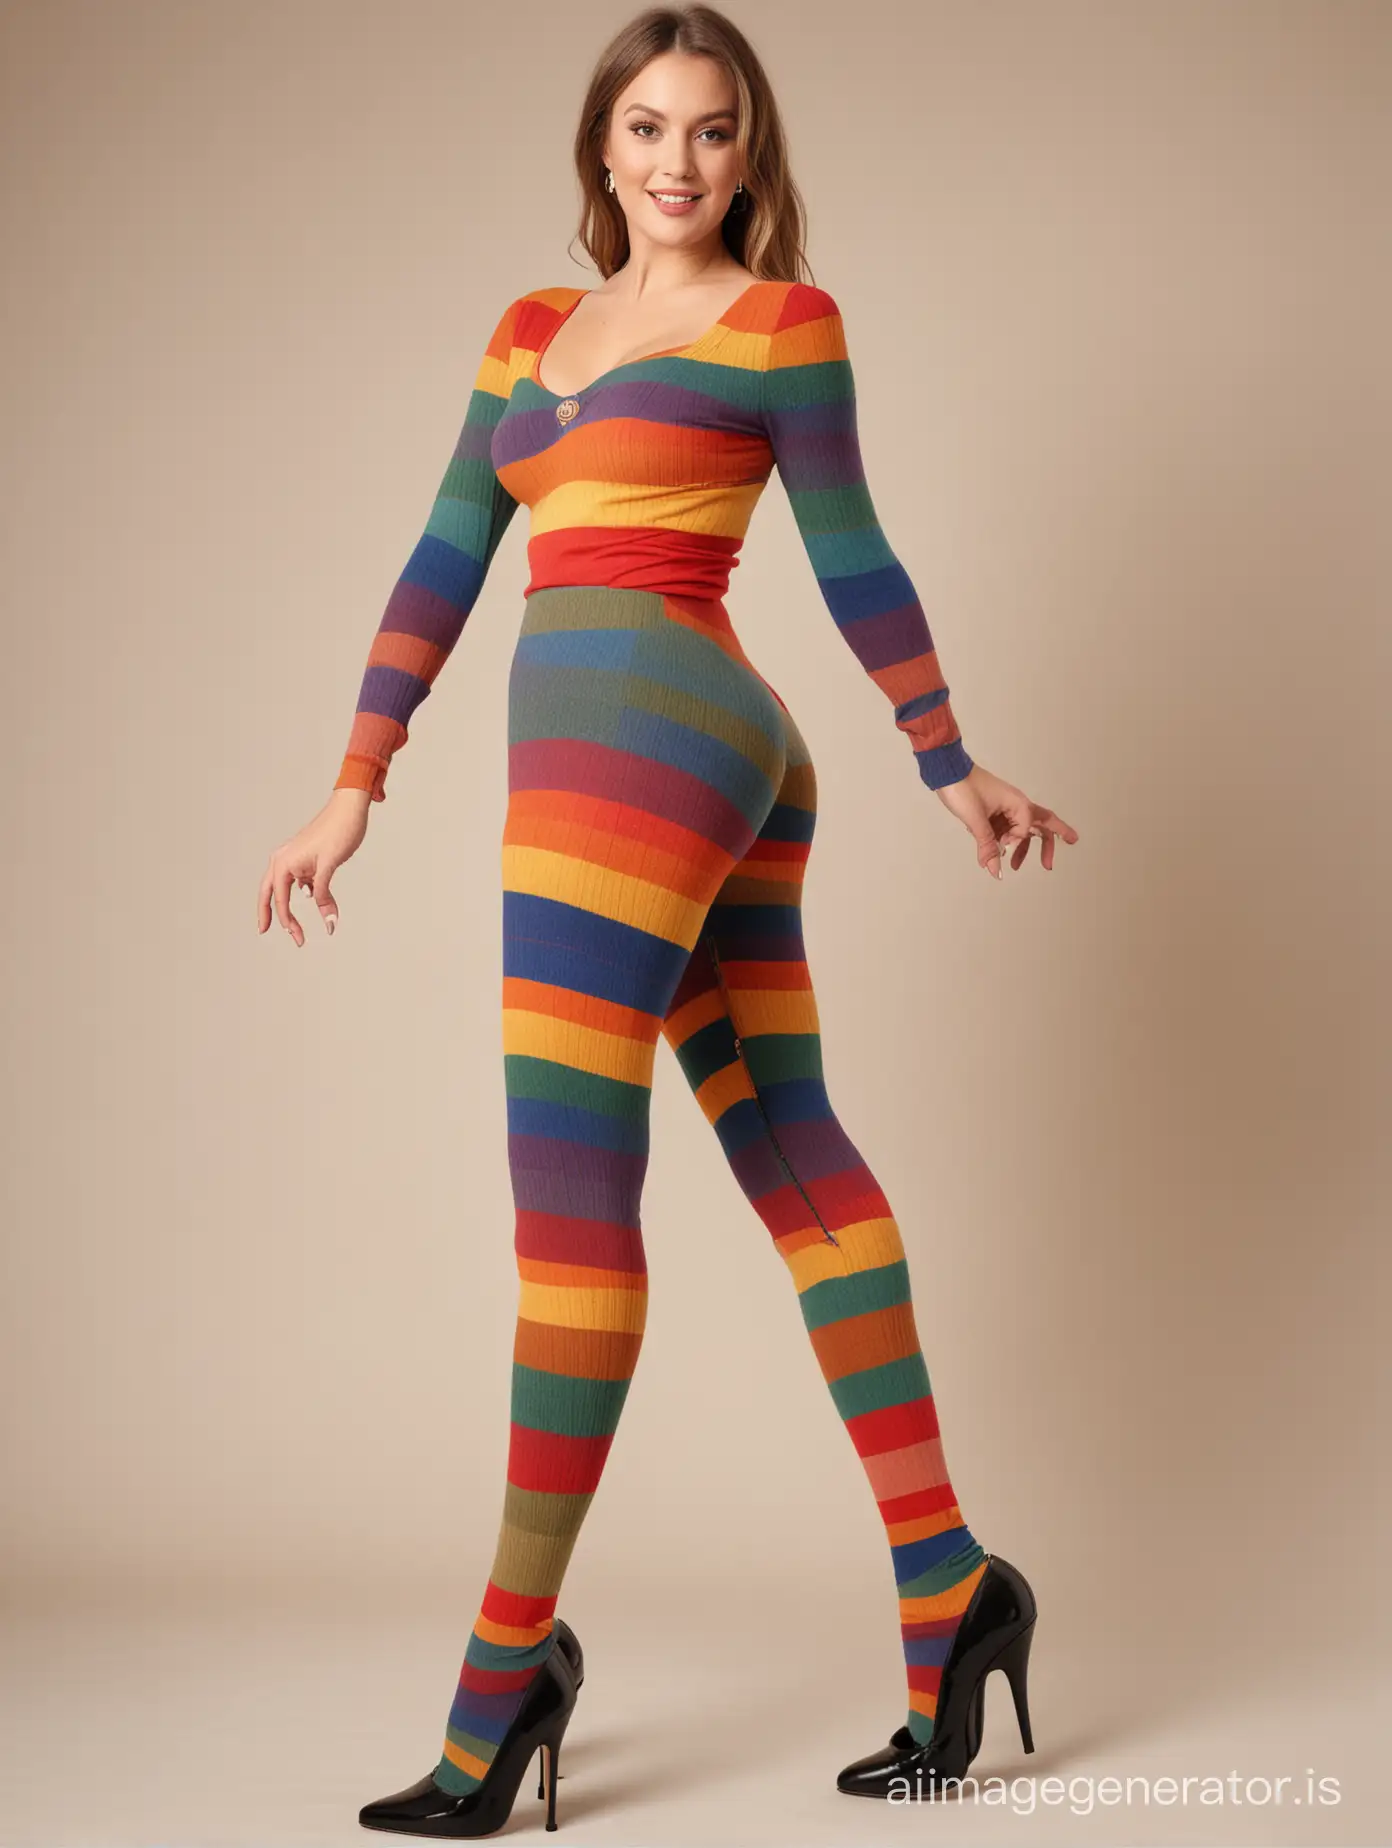 curvy woman "full body view" "extra thick wide  ribbed rainbow wool tights" high heels